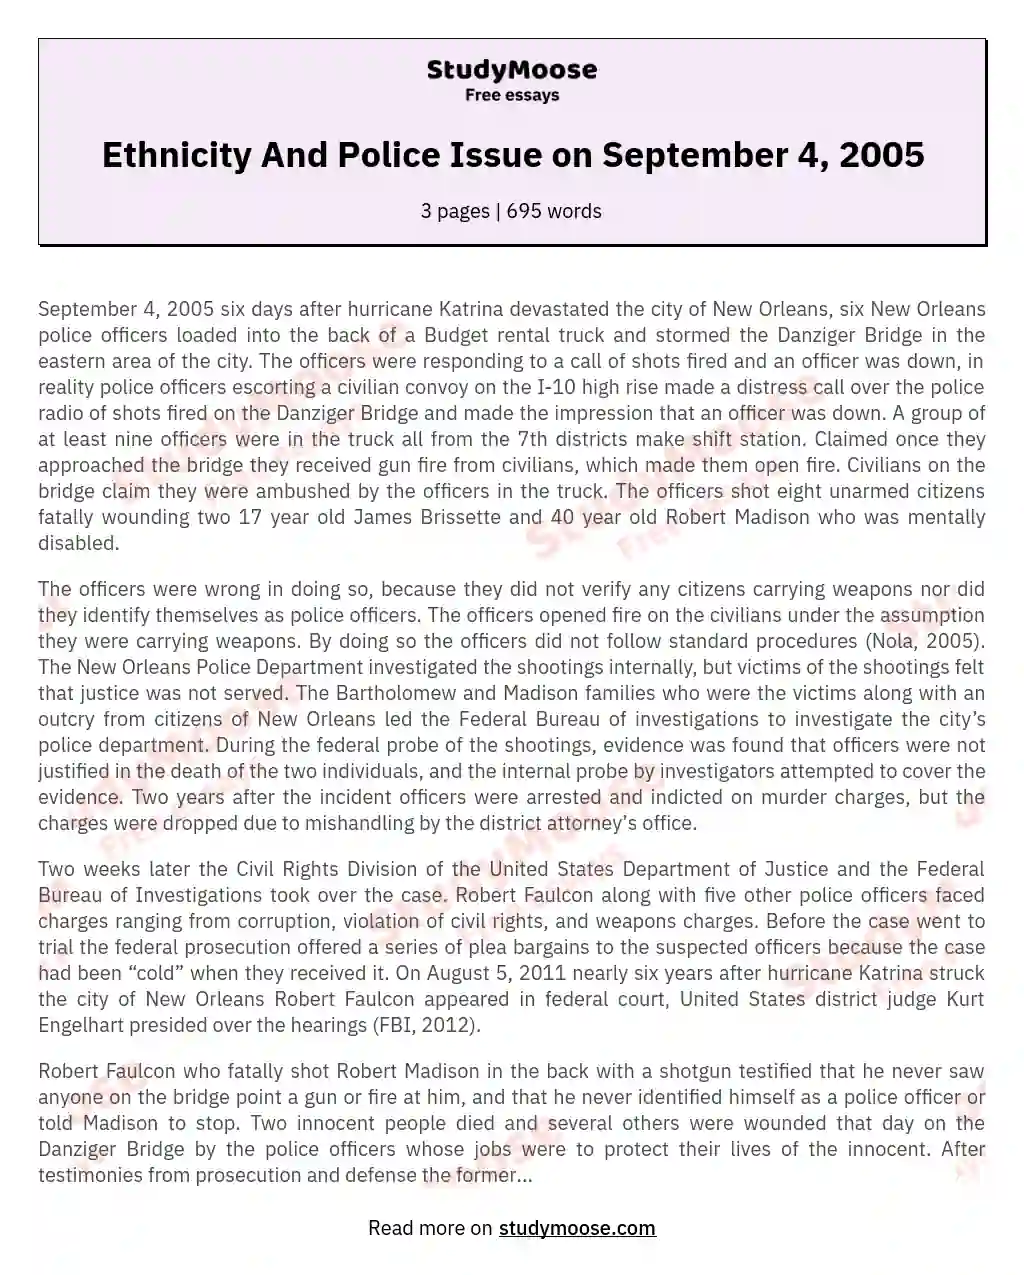 Ethnicity And Police Issue on September 4, 2005